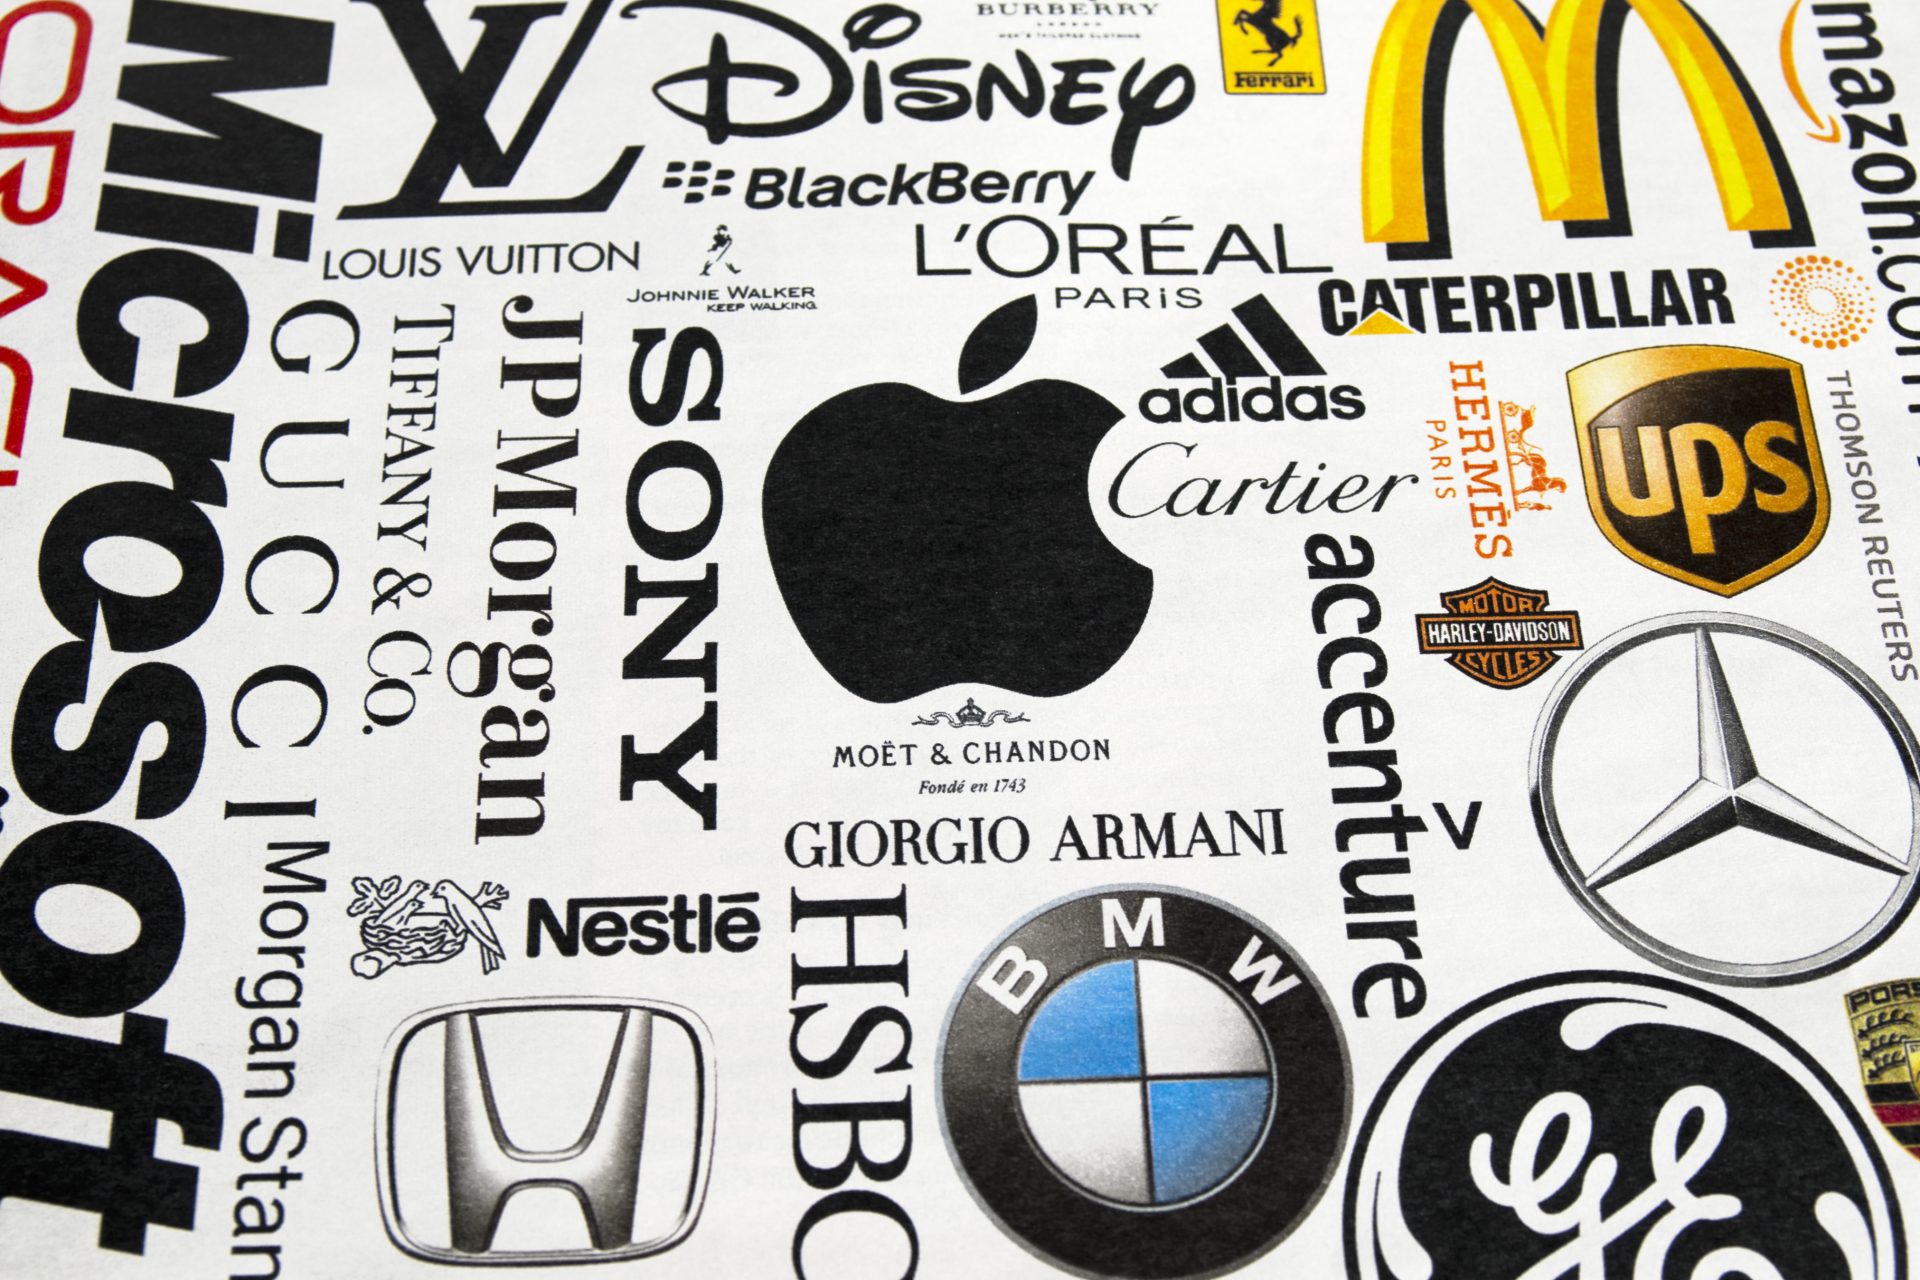 The secret hidden behind the logos of the most famous brands